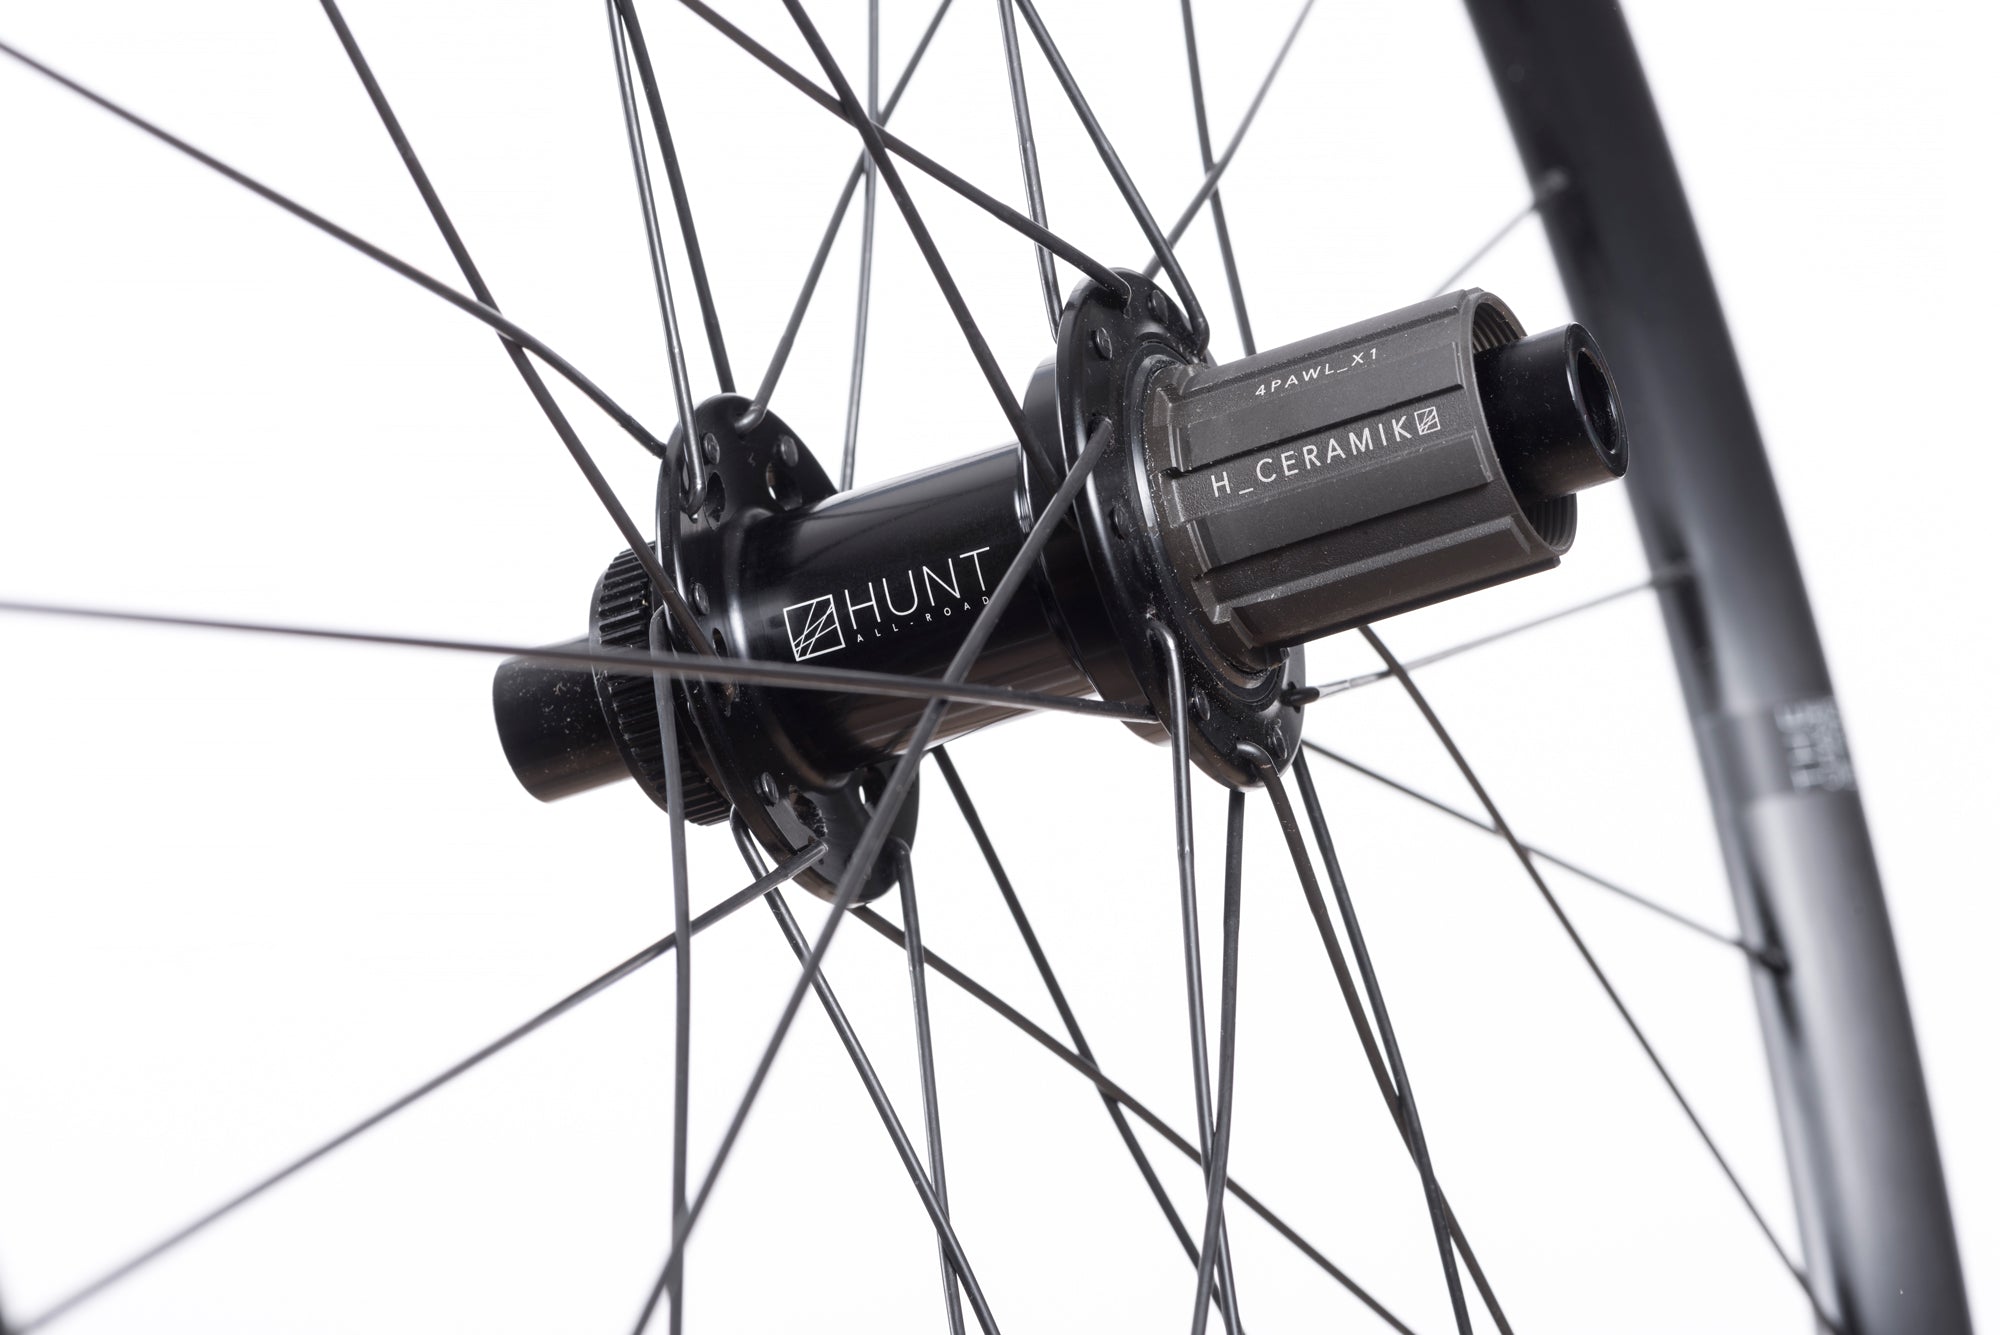 <h1>FREEHUB BODY</h1> <i>Durability is a theme for HUNT as time and money you spend fixing is time and money you cannot spend riding or upgrading your bikes. As a result, we've developed the <em>H_CERAMIK</em> coating to provide excellent durability and protect against cassette sprocket damage often seen on standard alloy freehub bodies.</i>